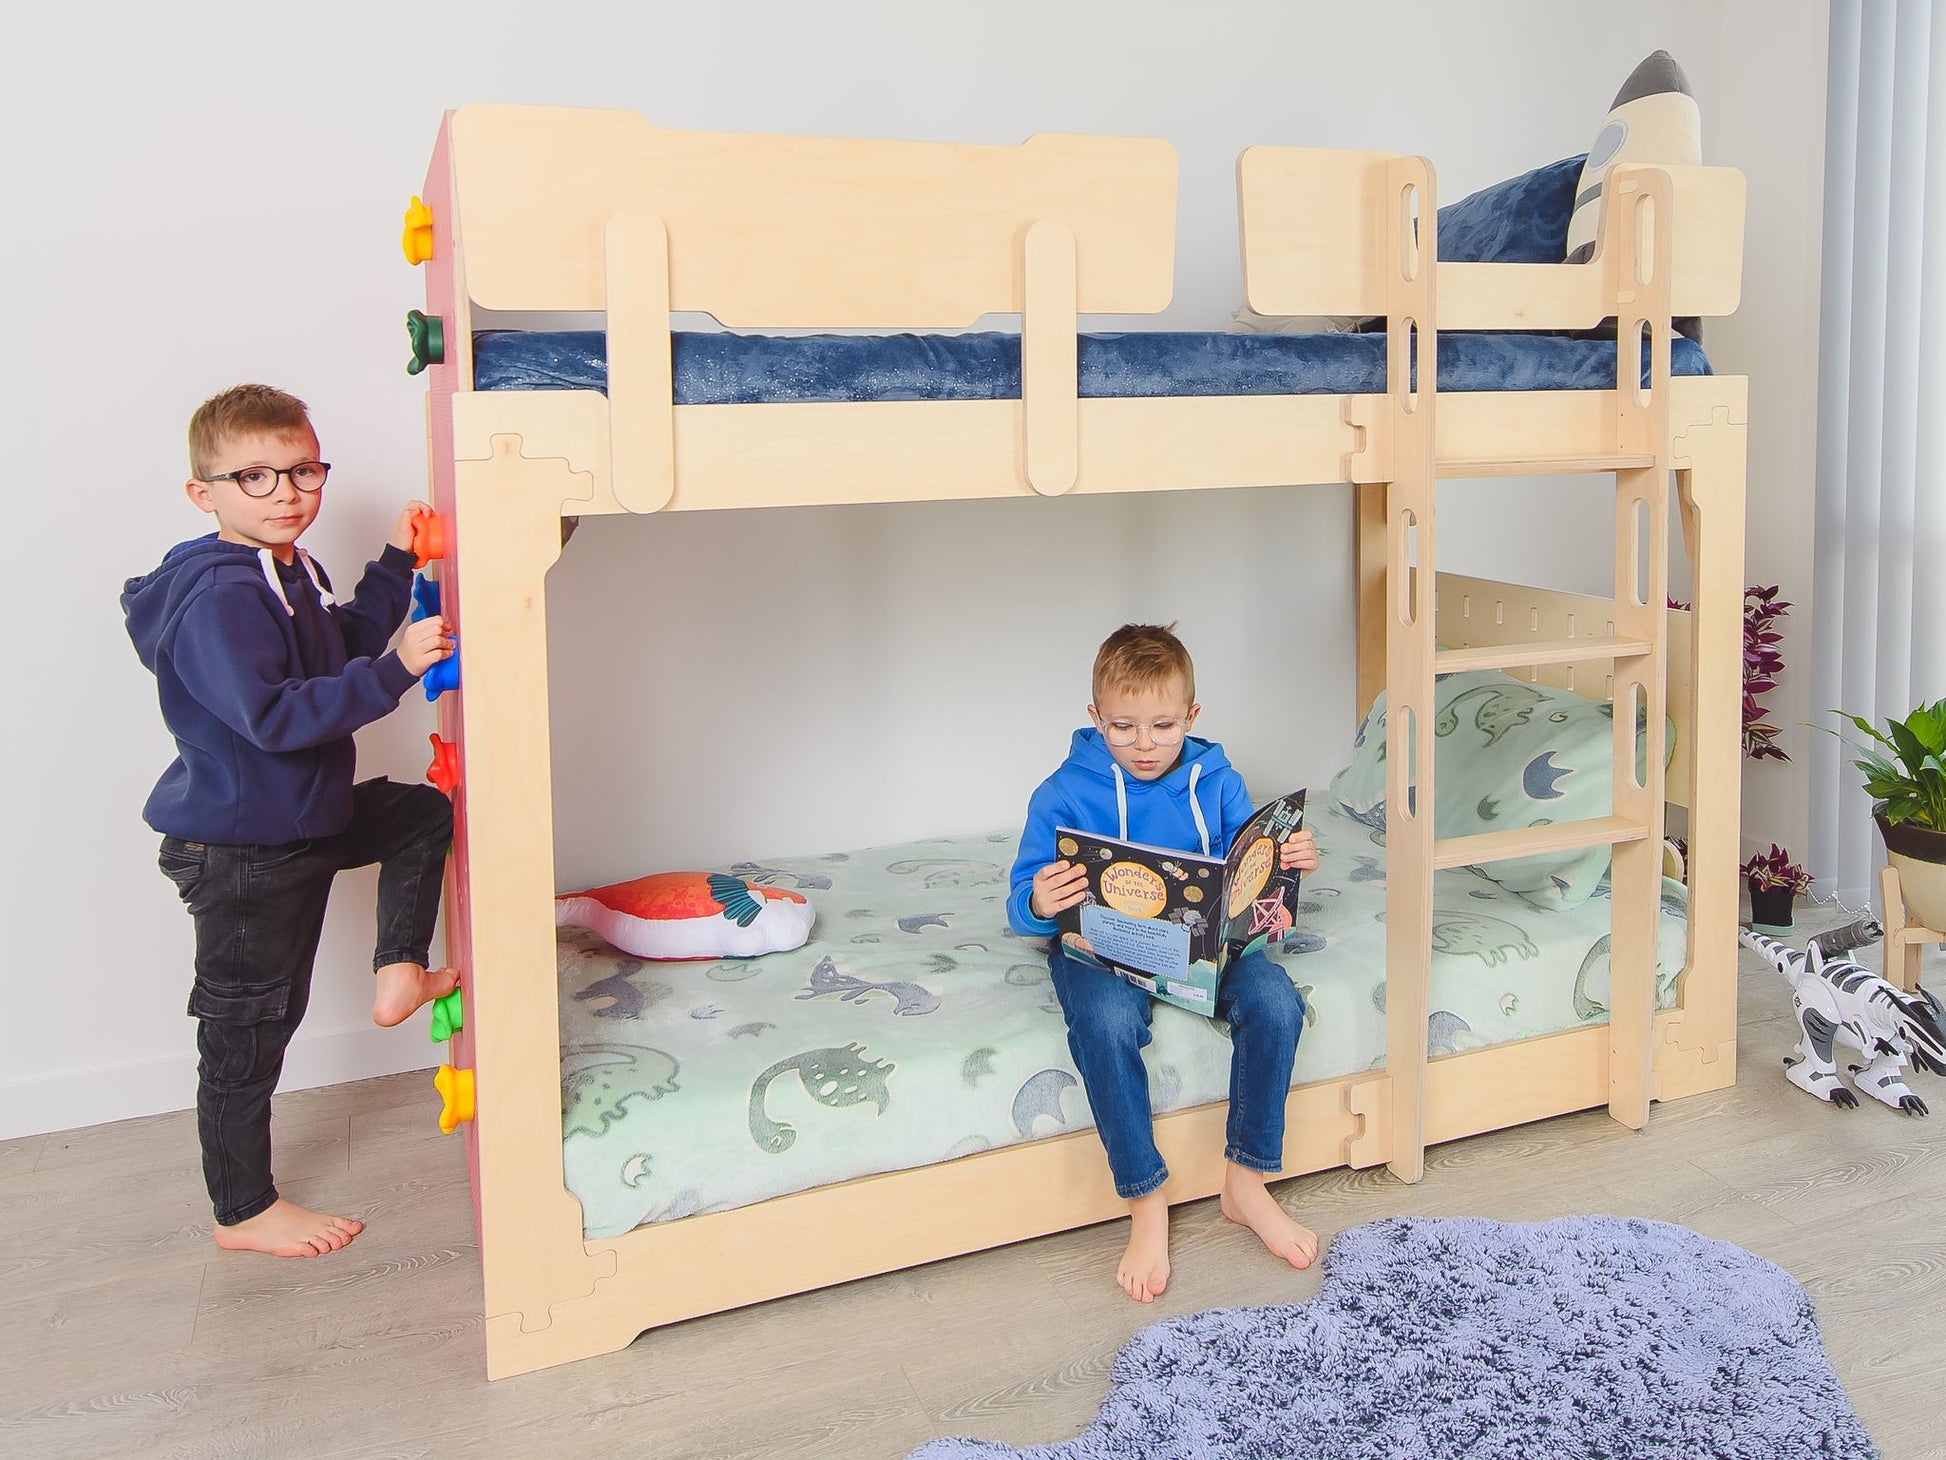 Flippable Transformer Bunk Bed: From cozy low bed to bunk heights. Experience the 3-in-1 design's space-savvy brilliance.